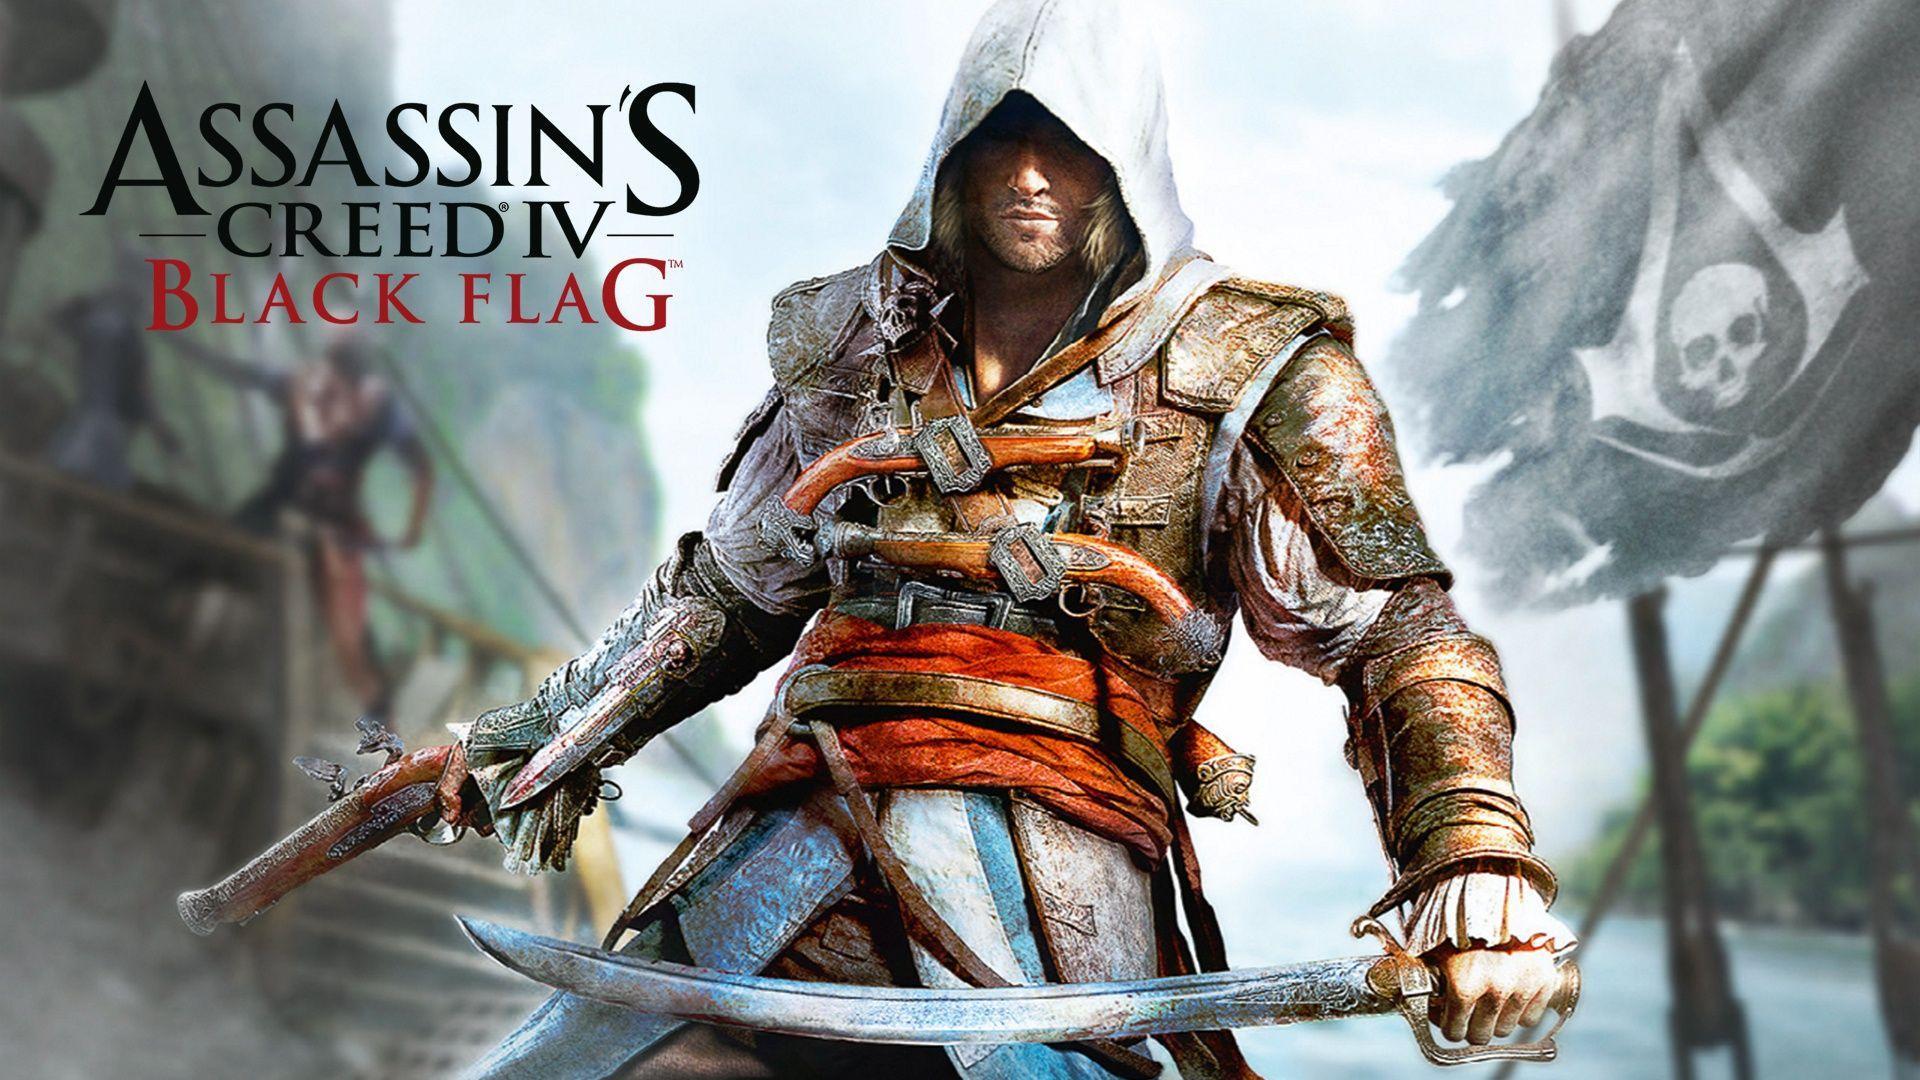 Let’s Play Assassin’s Creed IV: Black Flag